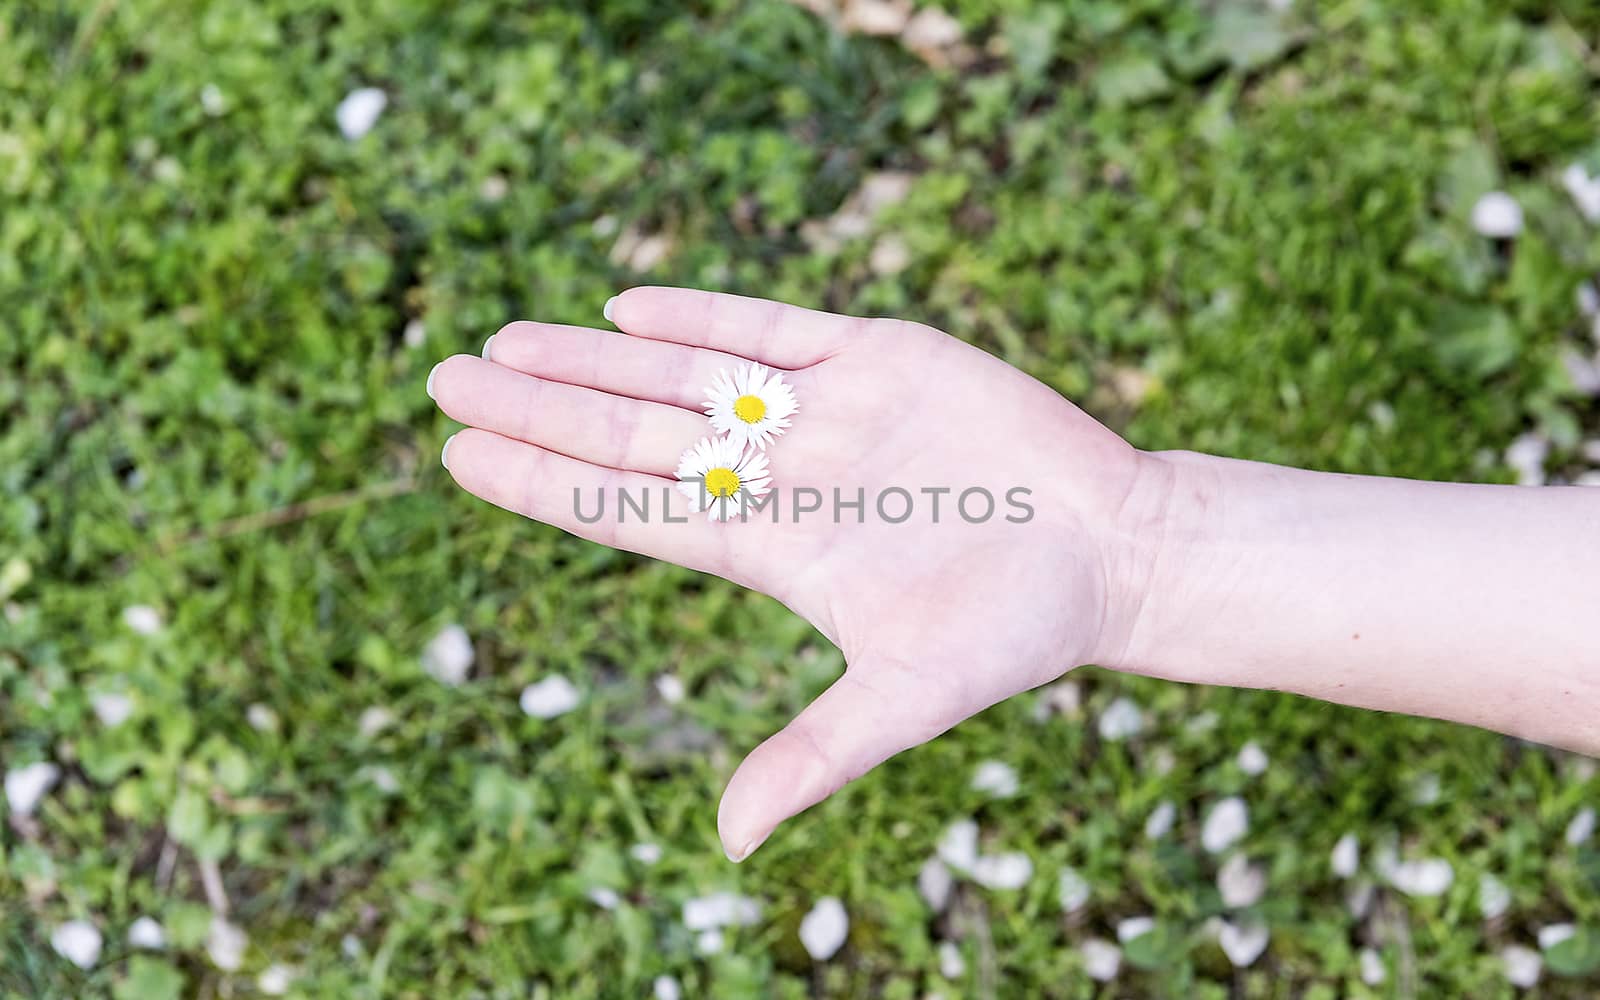 A female hand holding 2 daisies among fingers on a grass background